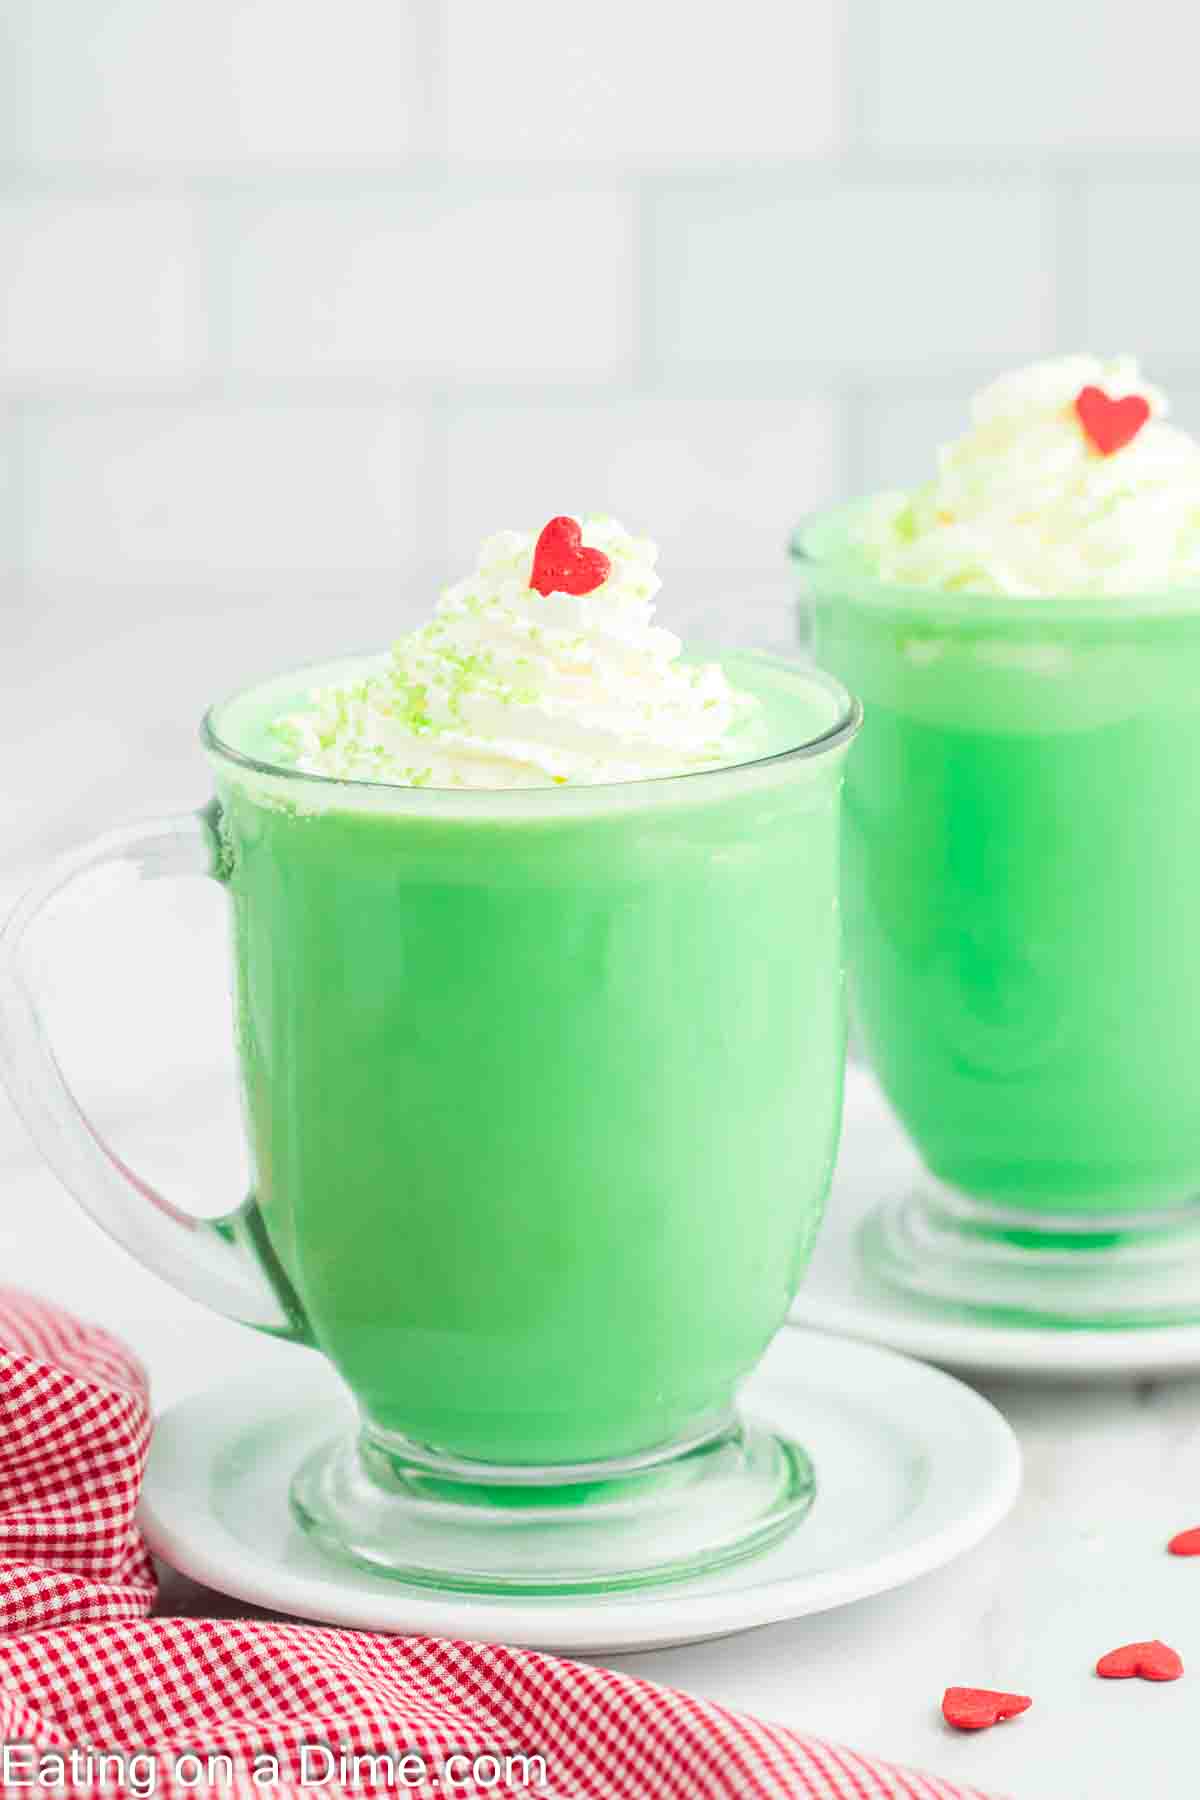 Grinch Hot Chocolate in mugs and topped with whipped cream and red heart